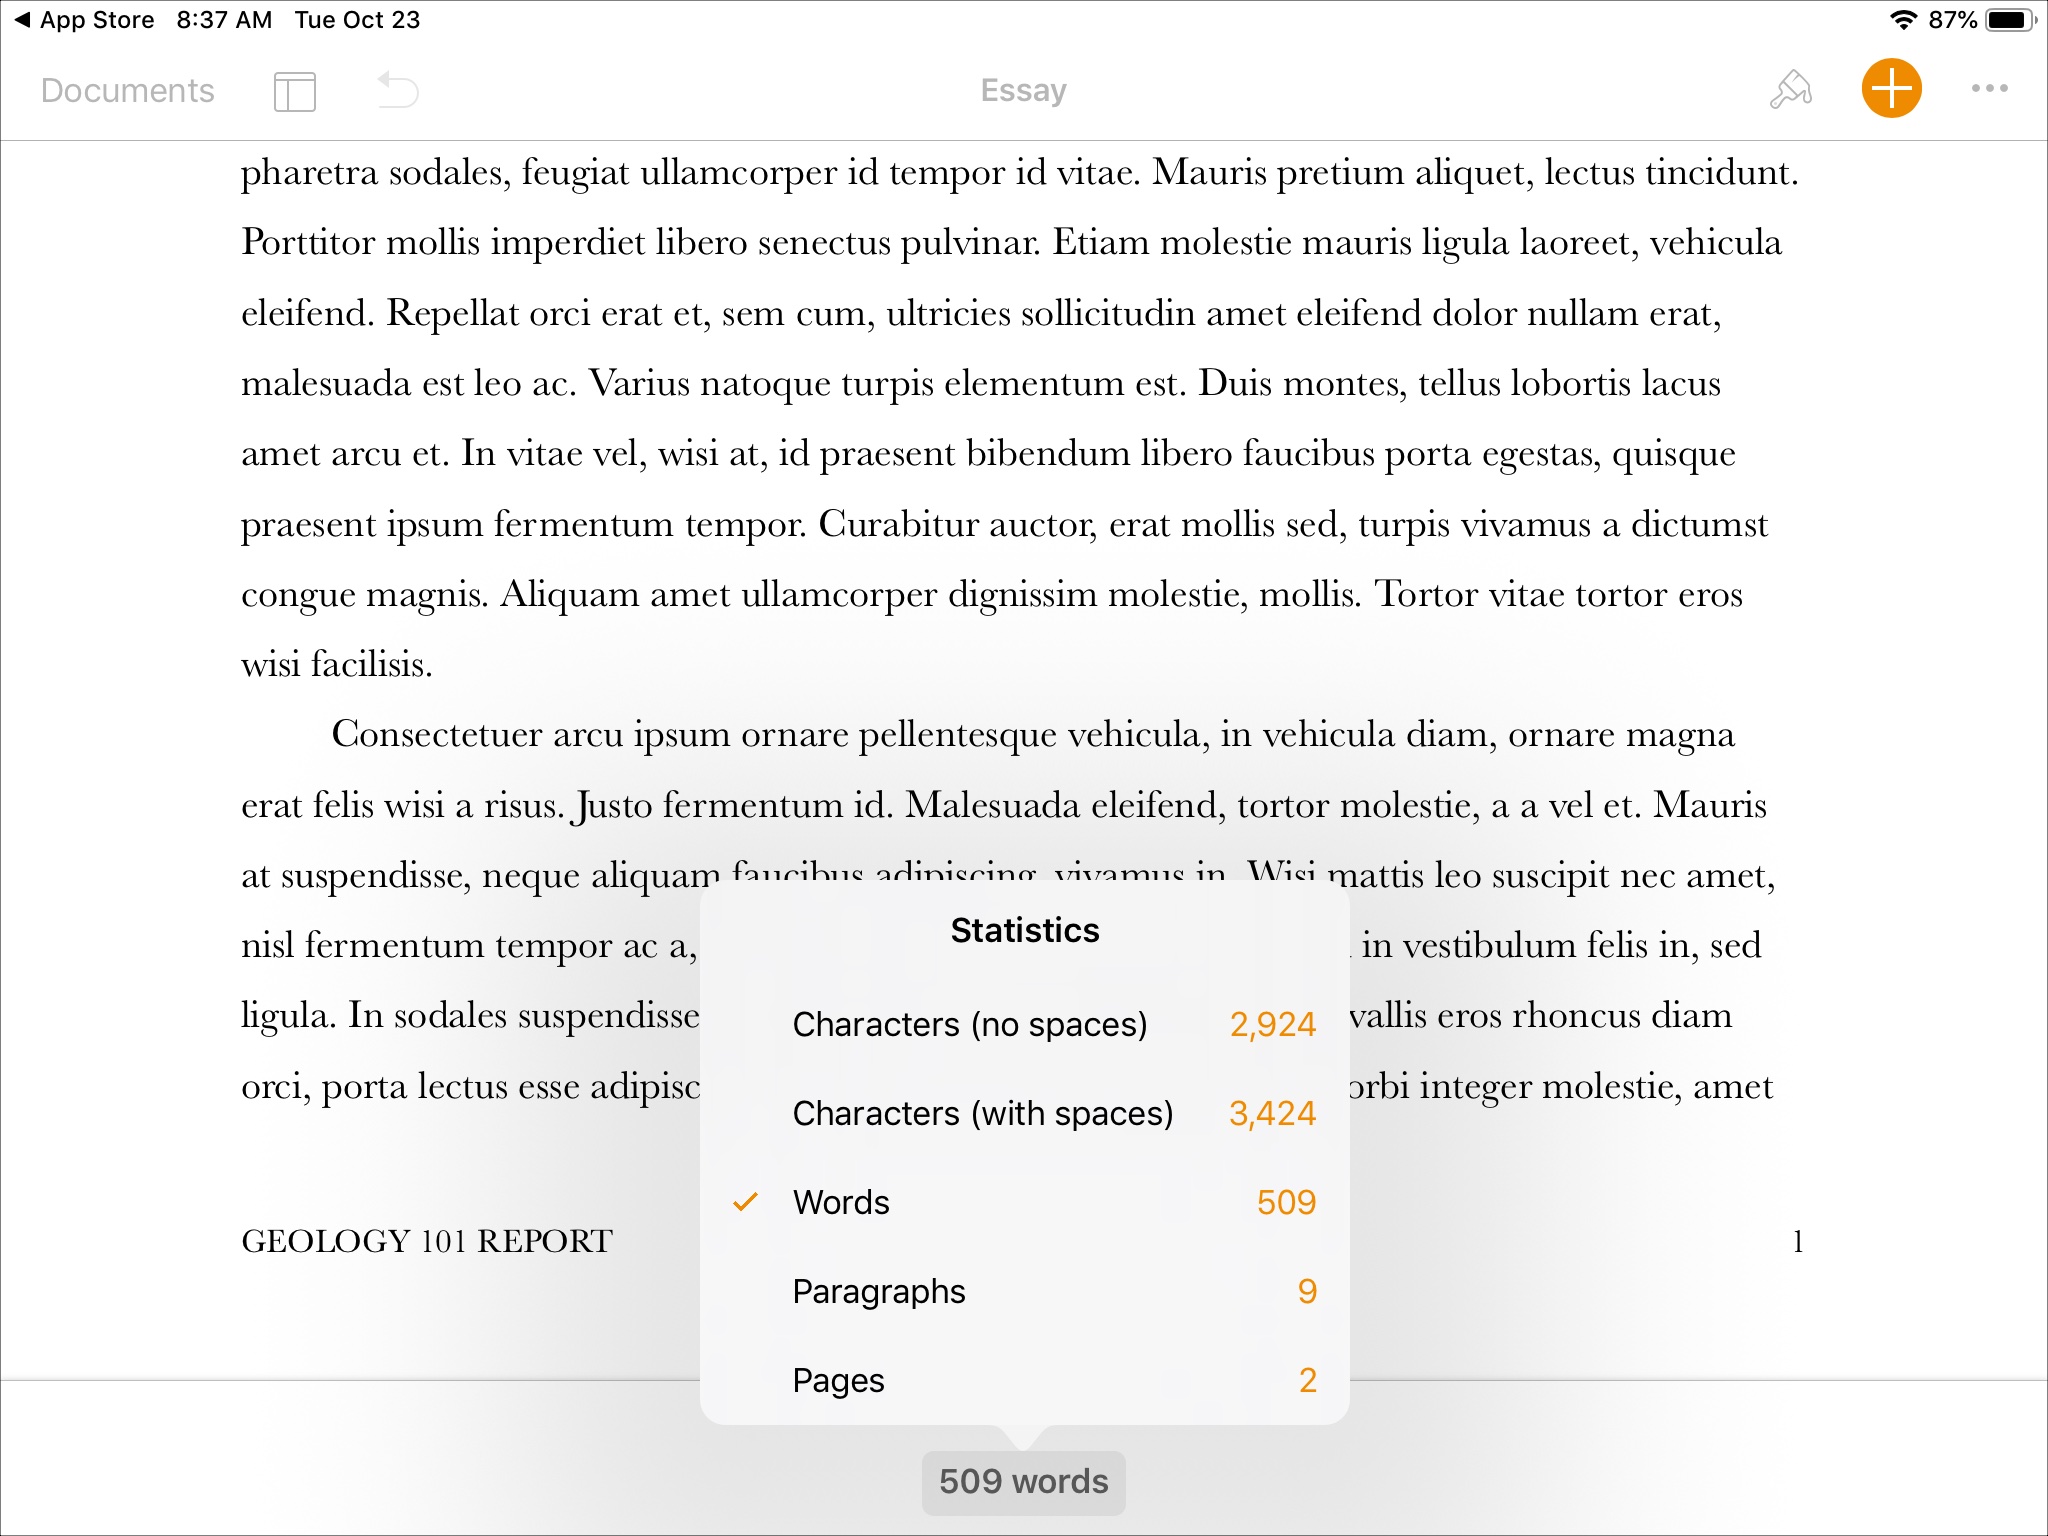 word count in pages on iPad